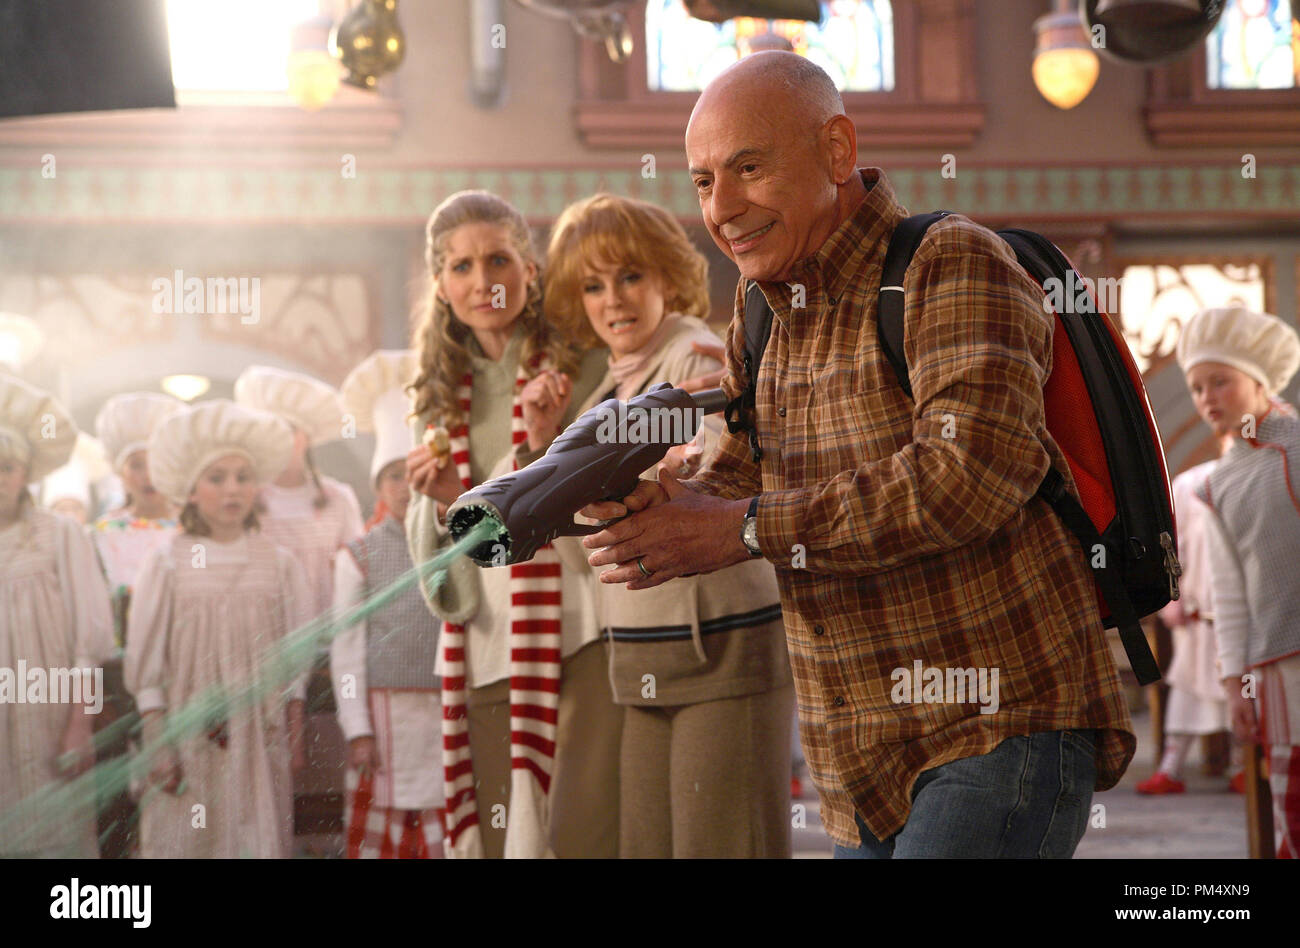 Studio Publicity Still from 'The Santa Clause 3: The Escape Clause' Elizabeth Mitchell, Ann-Margret, Alan Arkin © 2006 Disney Enterprises, Inc. Photo credit: Joseph Lederer   File Reference # 307372601THA  For Editorial Use Only -  All Rights Reserved Stock Photo